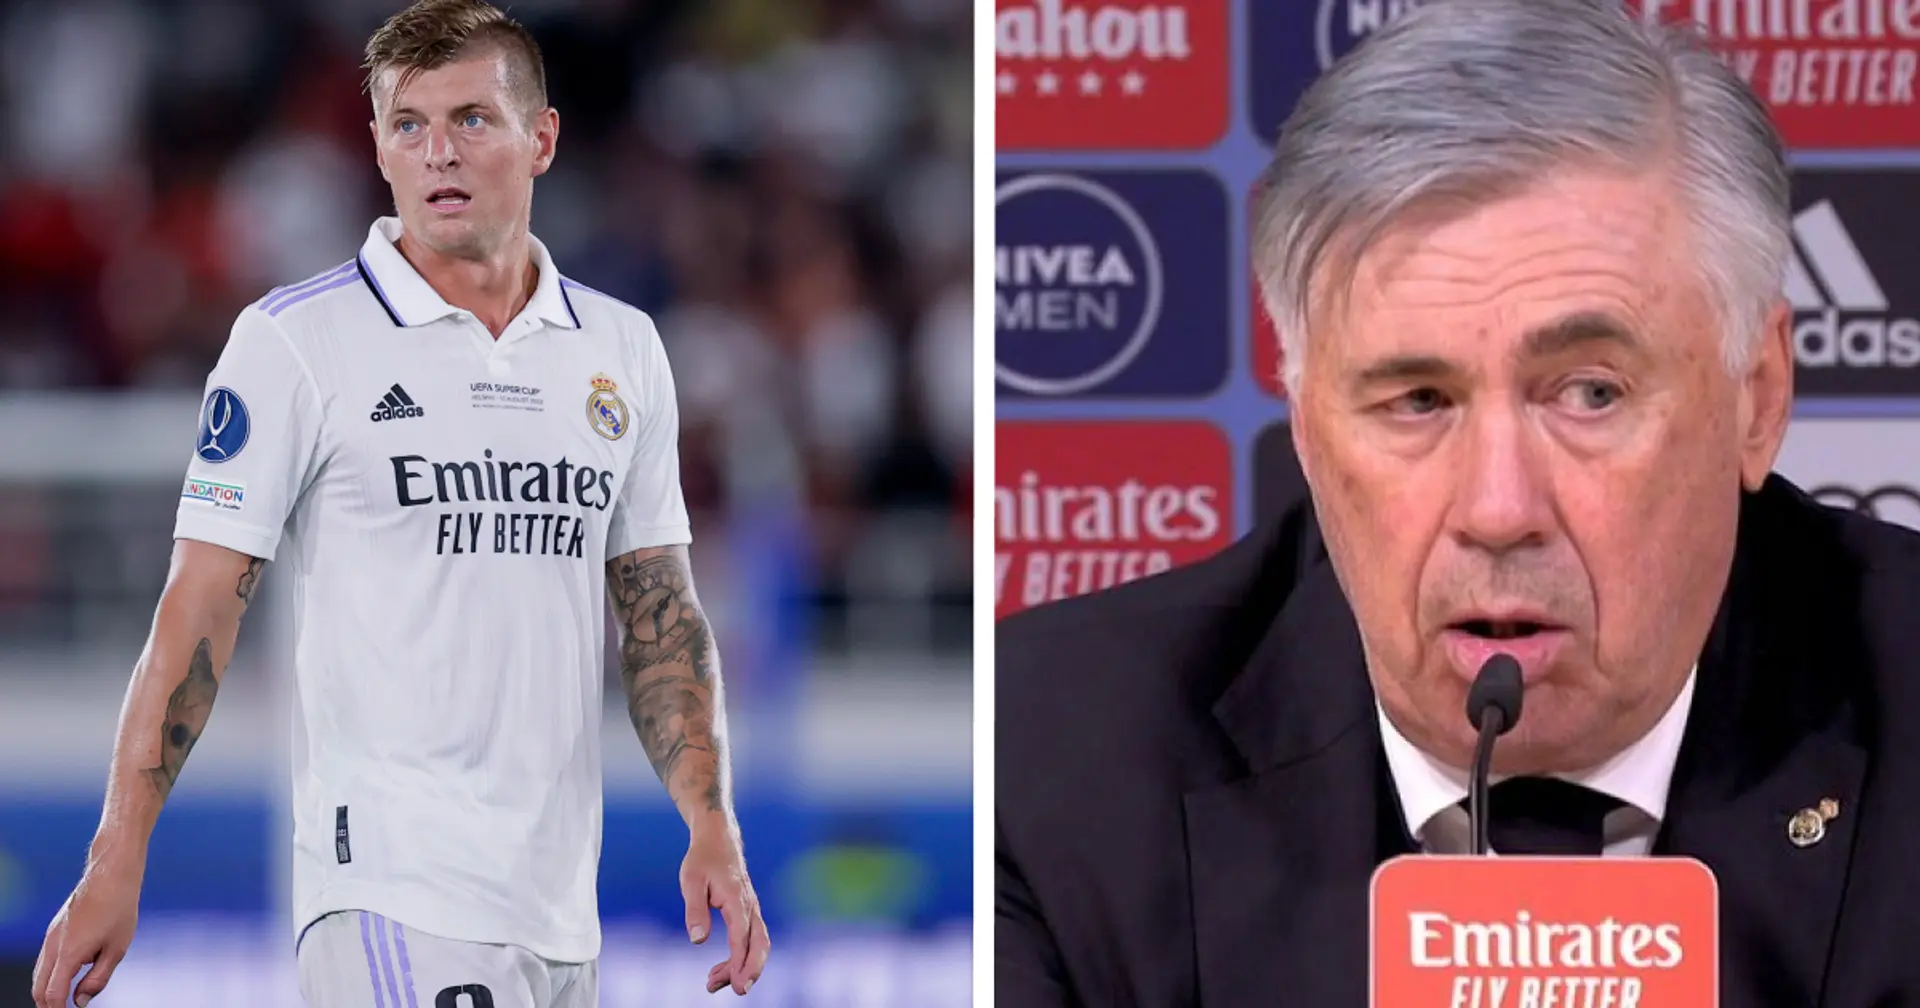 Reason why Ancelotti didn't substitute Kroos even with midfielder visibly tired in Celtic win